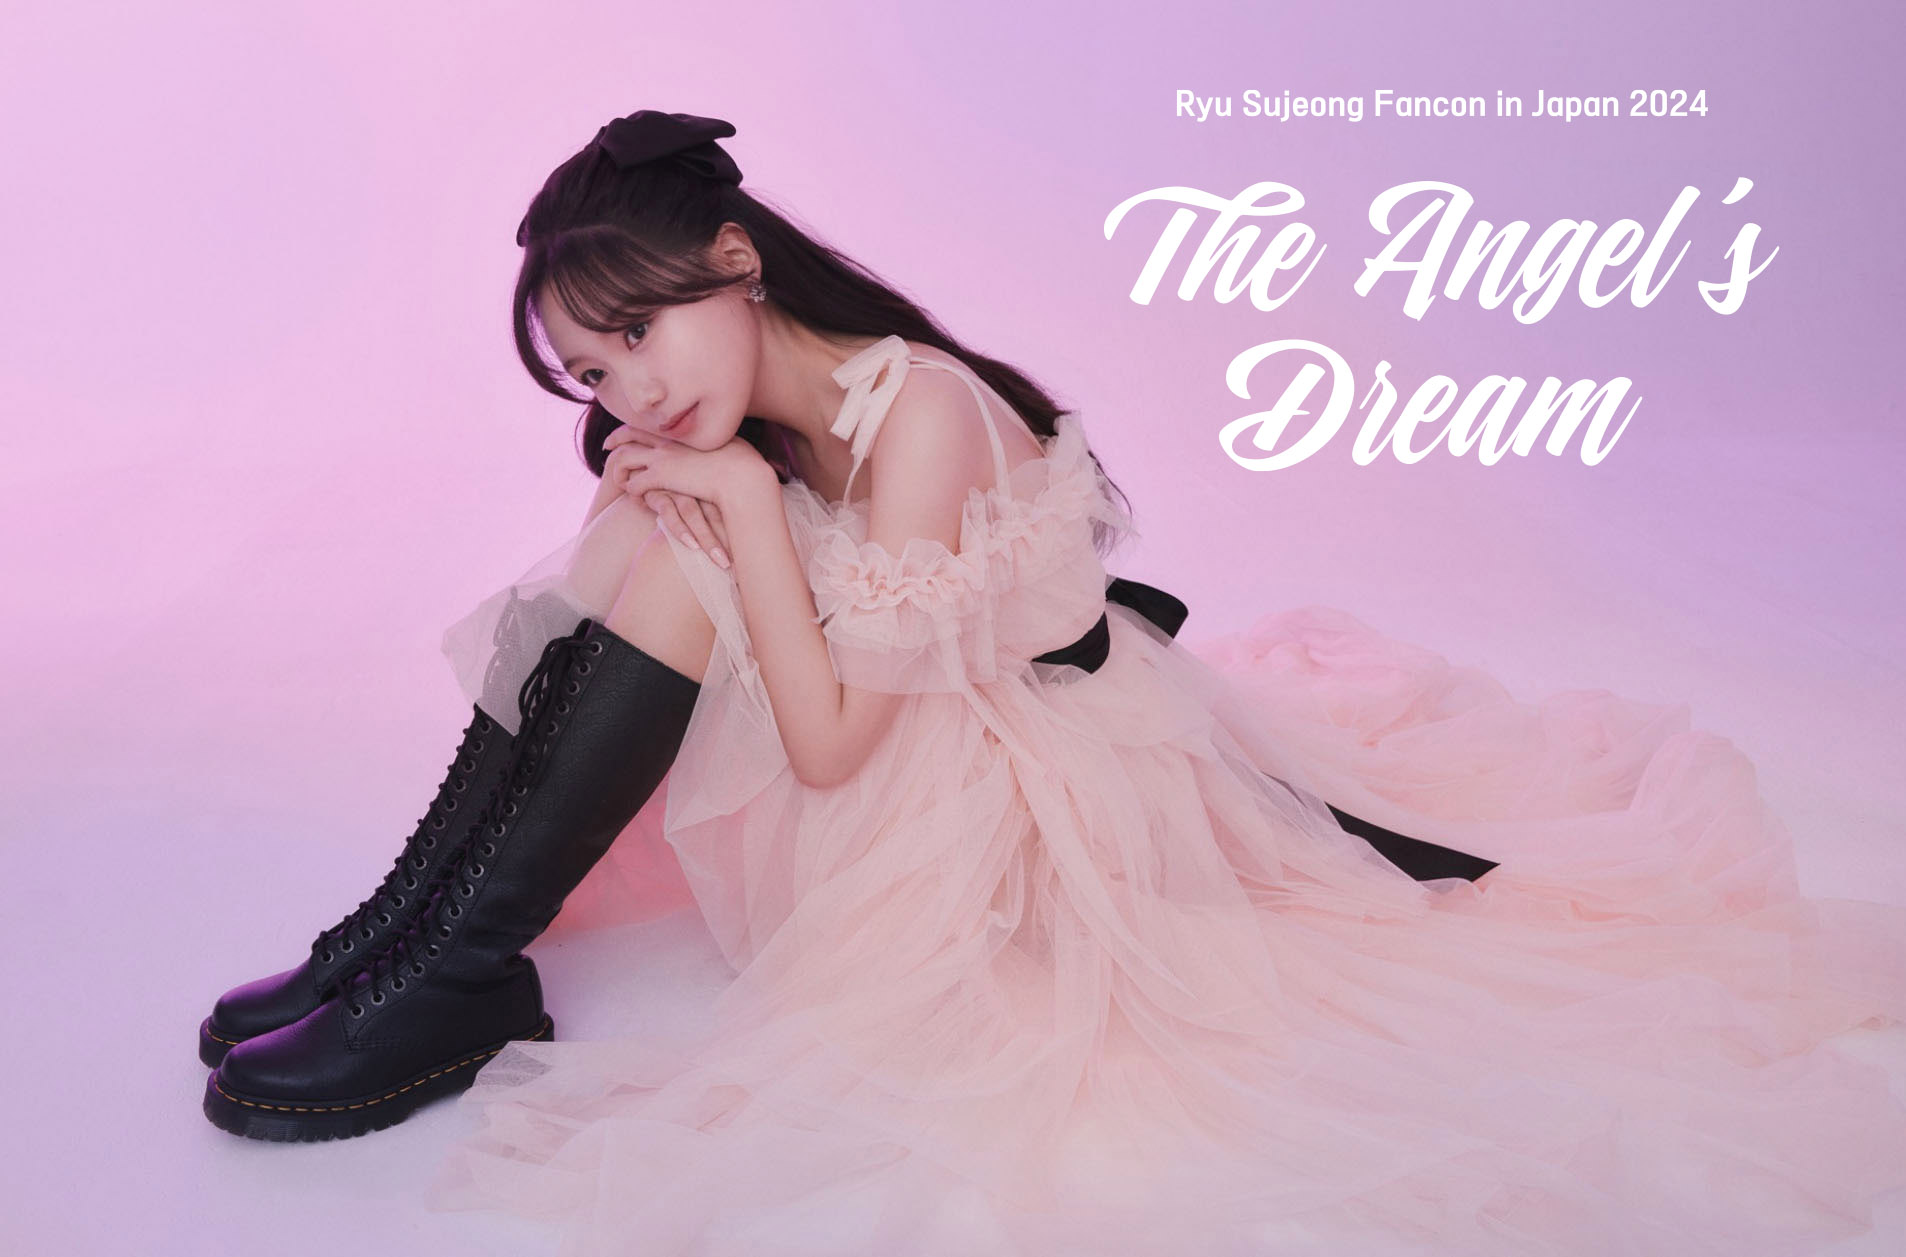 Ryu Sujeong Fancon in Japan 2024: The Angel's Dream